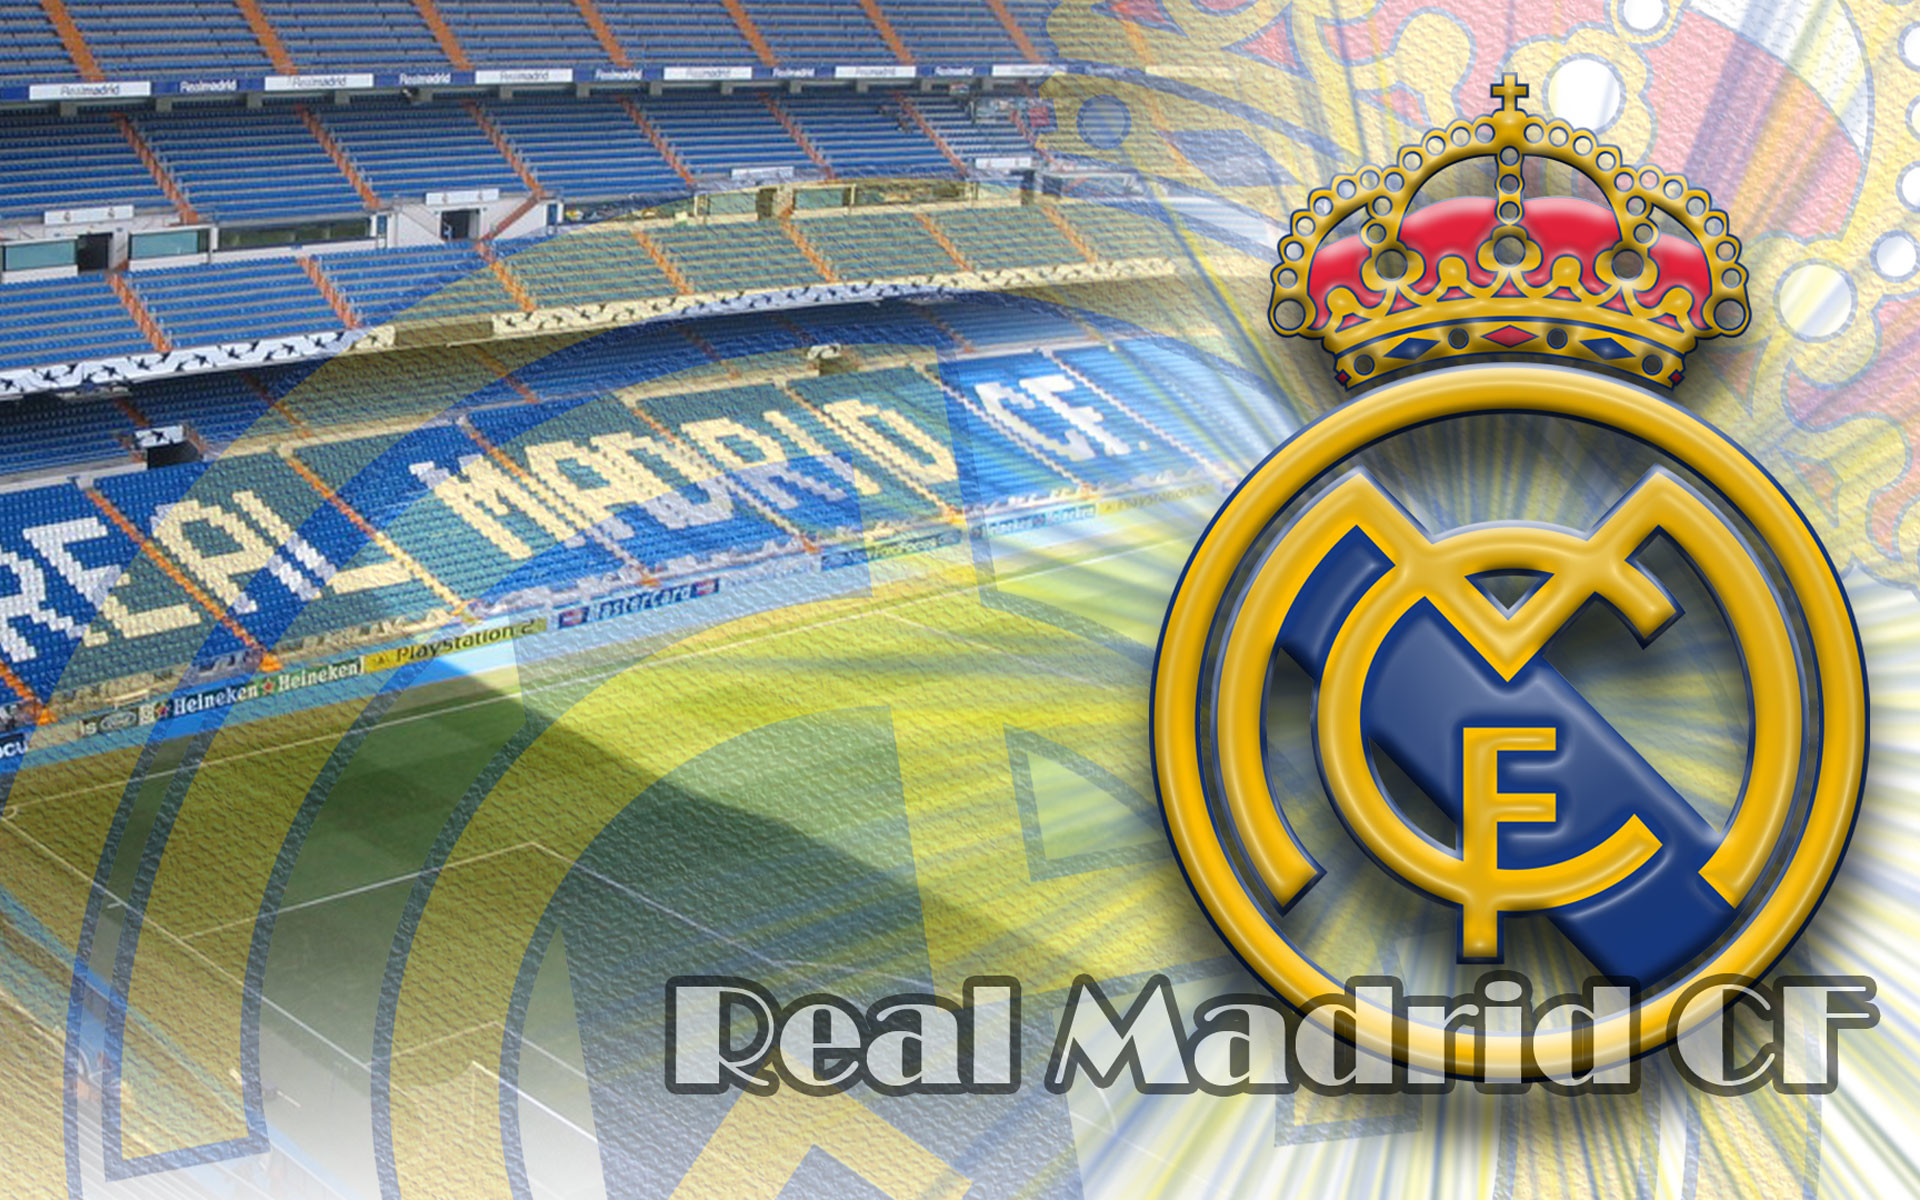 1920x1200 Real Madrid Theme For Windows 8 | Ouo Themes | Epic Car Wallpapers |  Pinterest | Real madrid wallpapers, Real madrid and Madrid